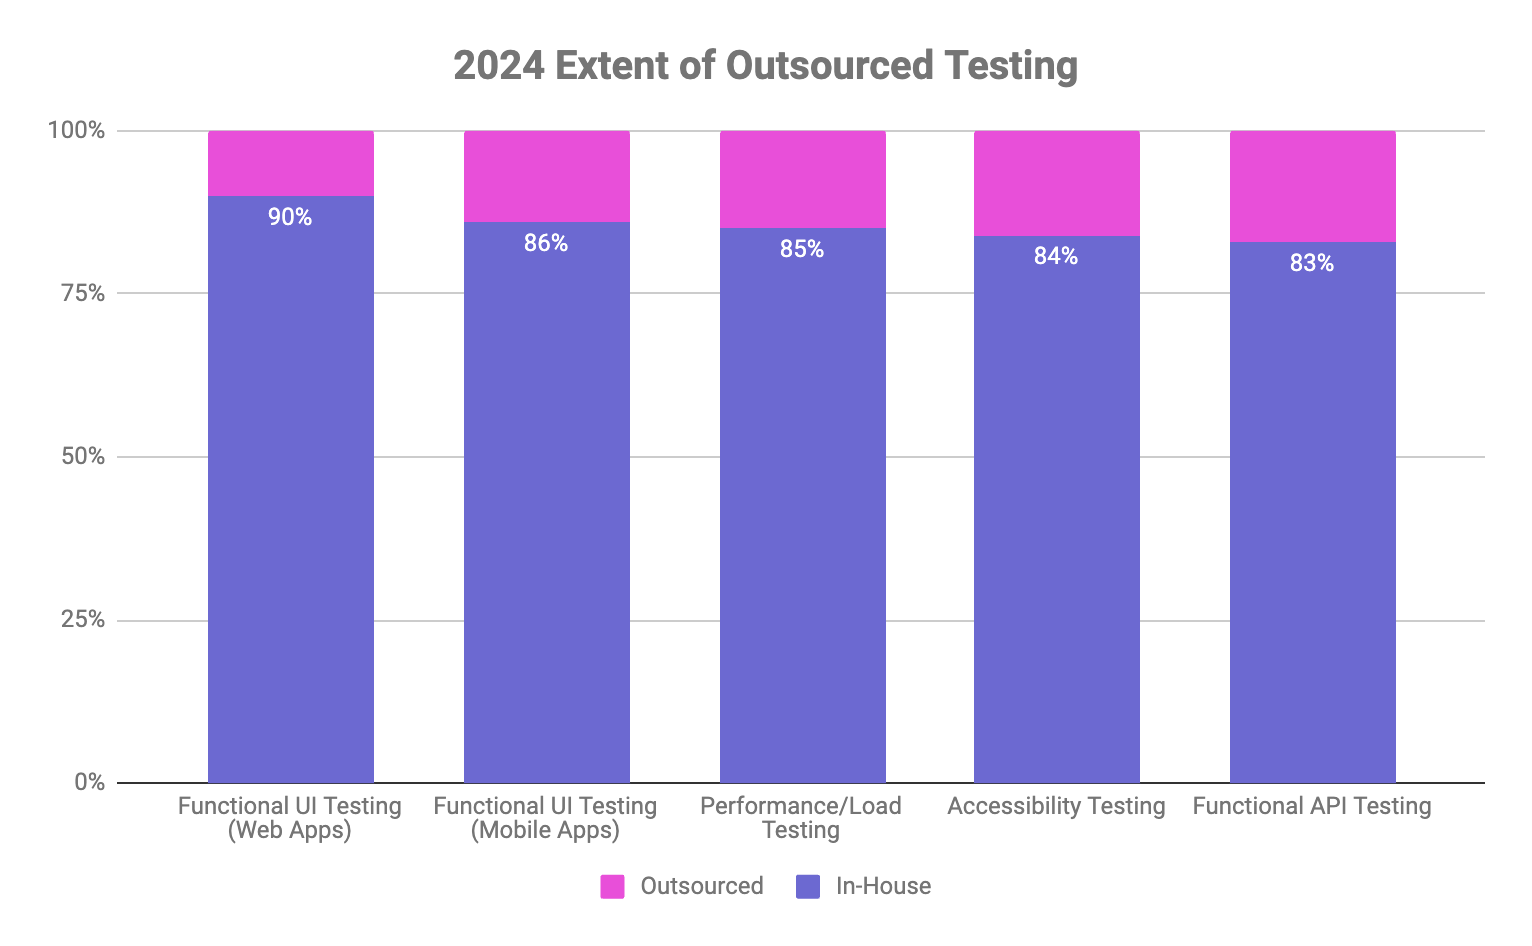 Bar chart showing 2024 Extent of Outsourced Testing